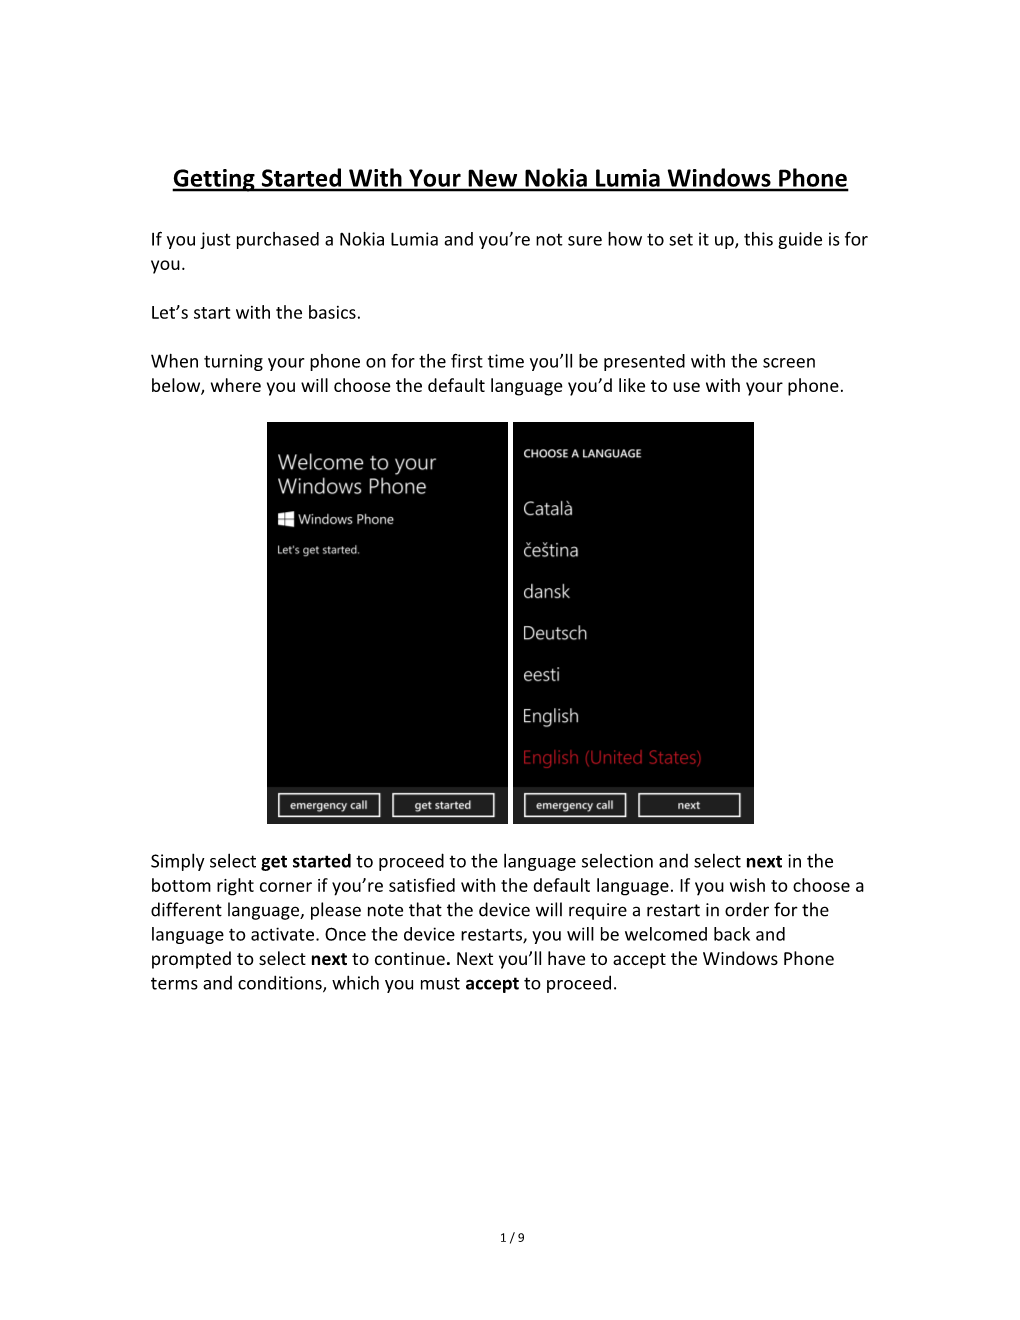 Getting Started with Your New Nokia Lumia Windows Phone